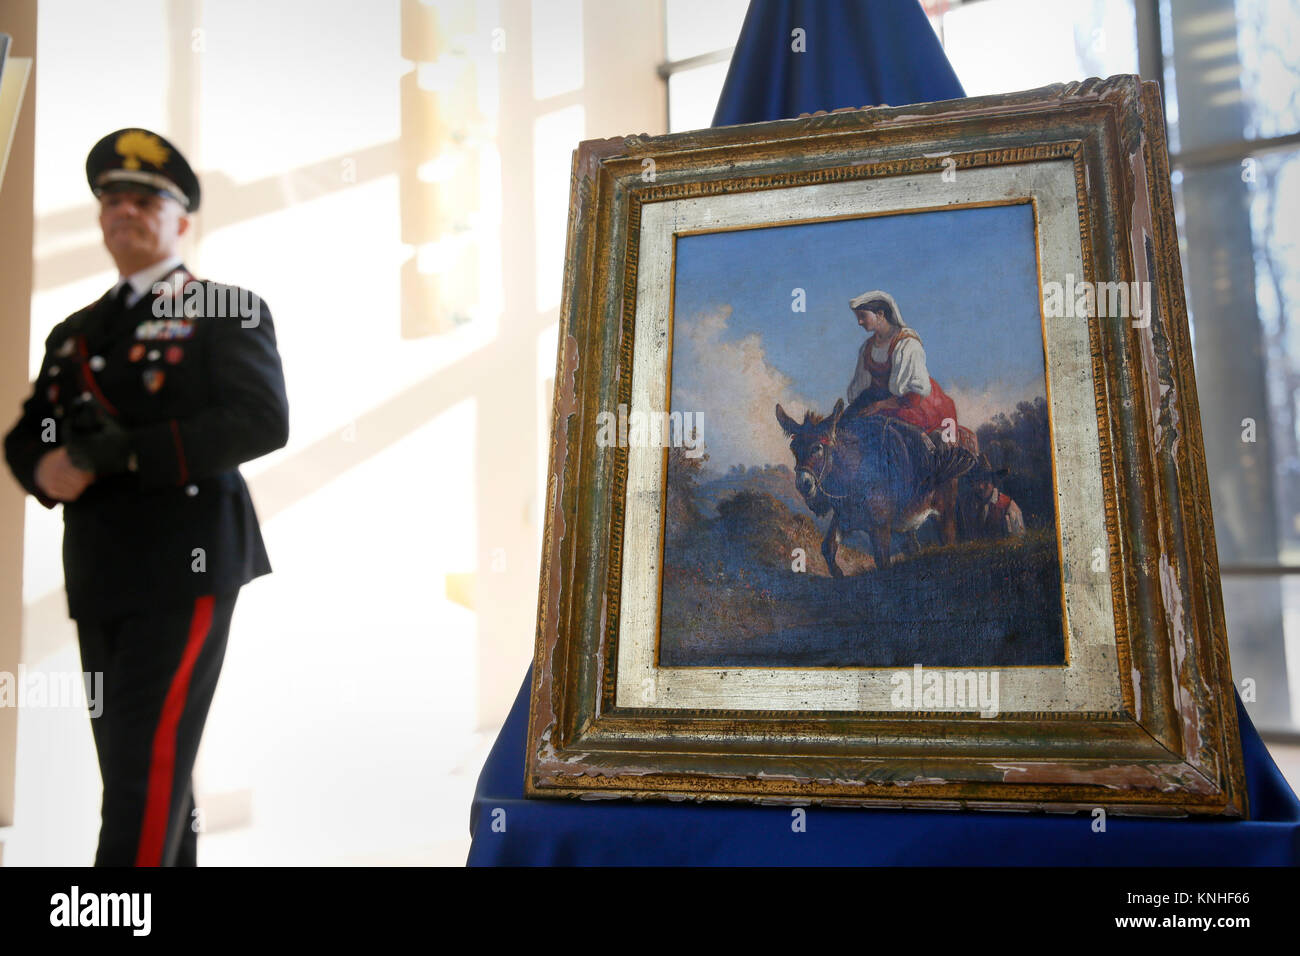 An Italian Carabinieri officer guards the Carelli painting during a repatriation ceremony at the Italian Embassy December 9, 2016 in Washington, DC. The painting was stolen from a private residence in Naples in 2001, and was later sold to an art dealer at a Pennsylvania auction house in 2014. (photo by Glenn Fawcett  via Planetpix) Stock Photo